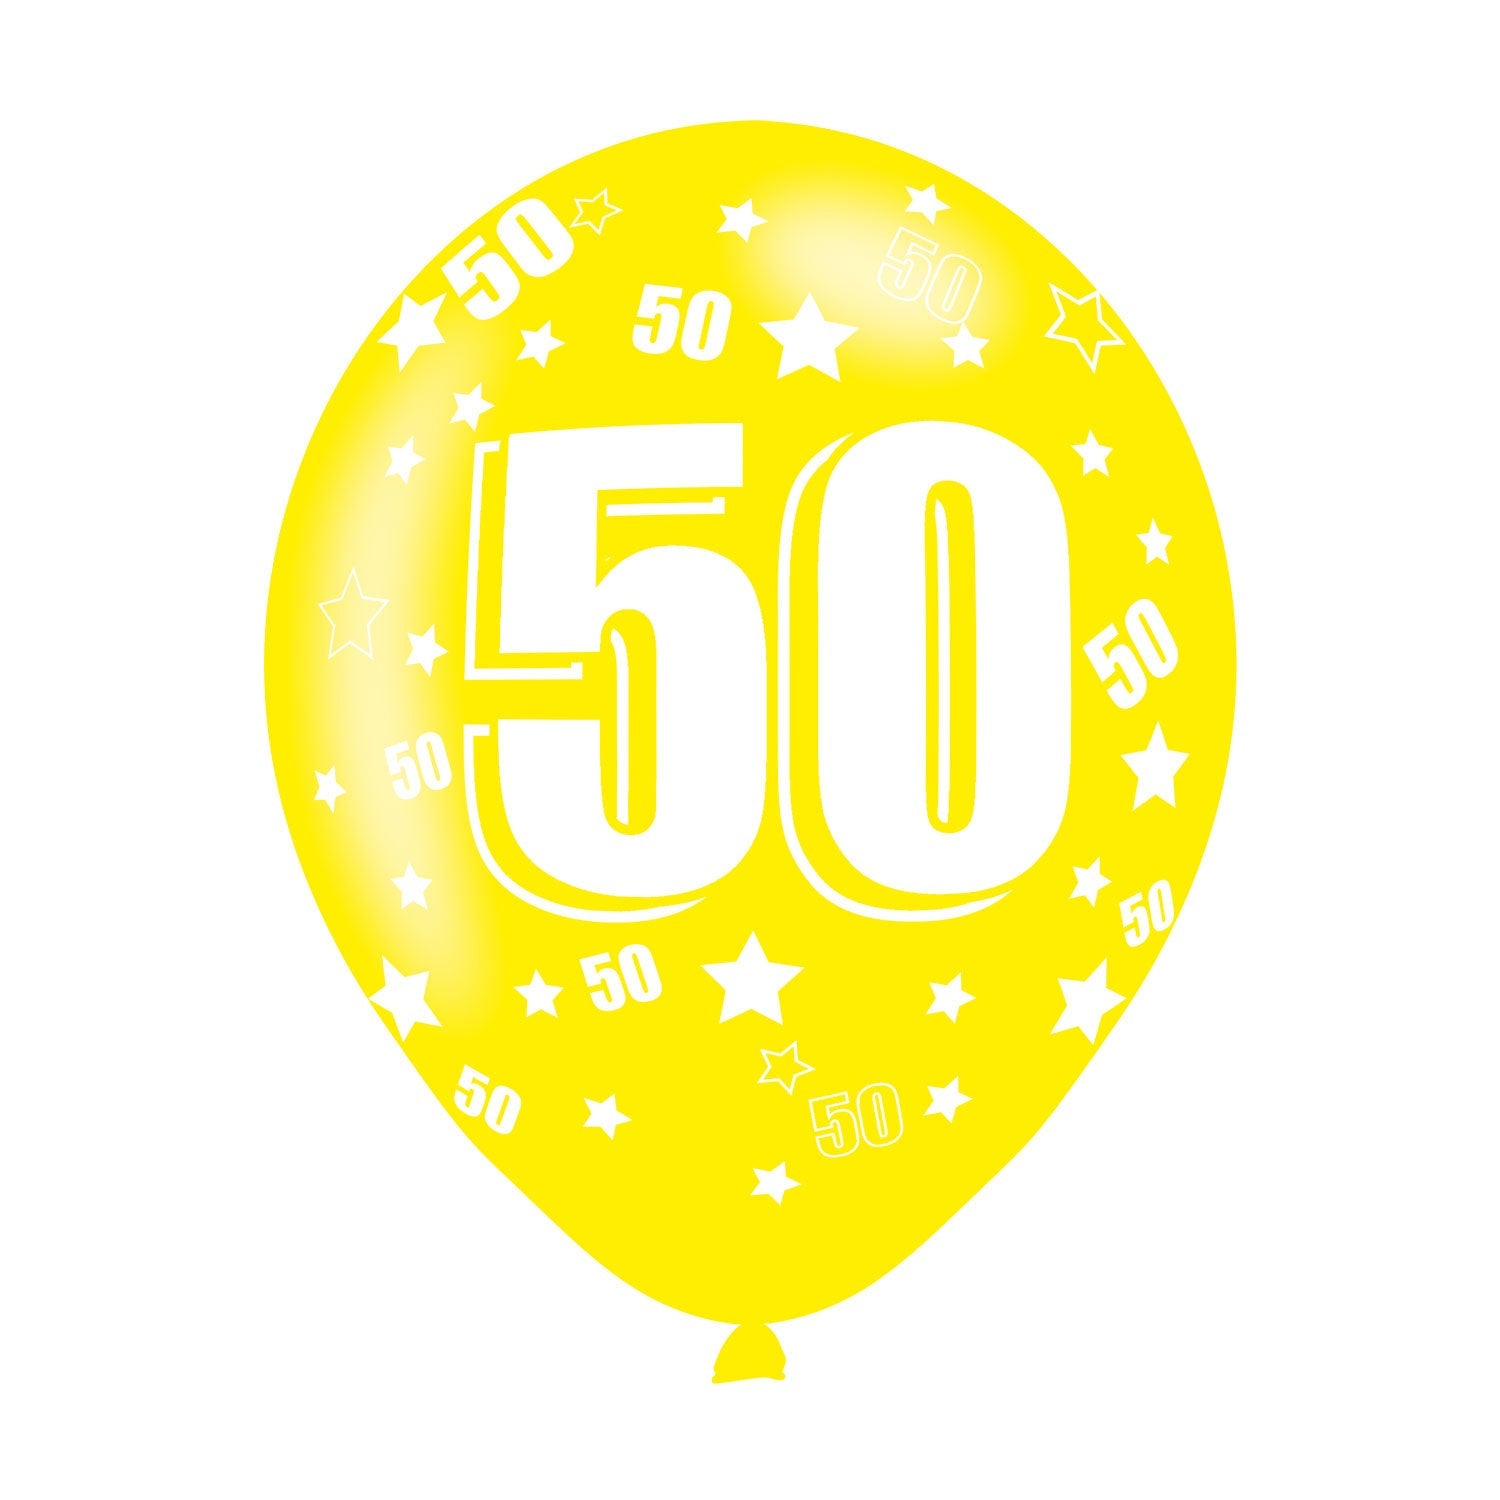 Age 50 Assorted Colour Birthday Latex Balloons. Will inflate up to 27cm. Suitable for Air fill or Helium fill.